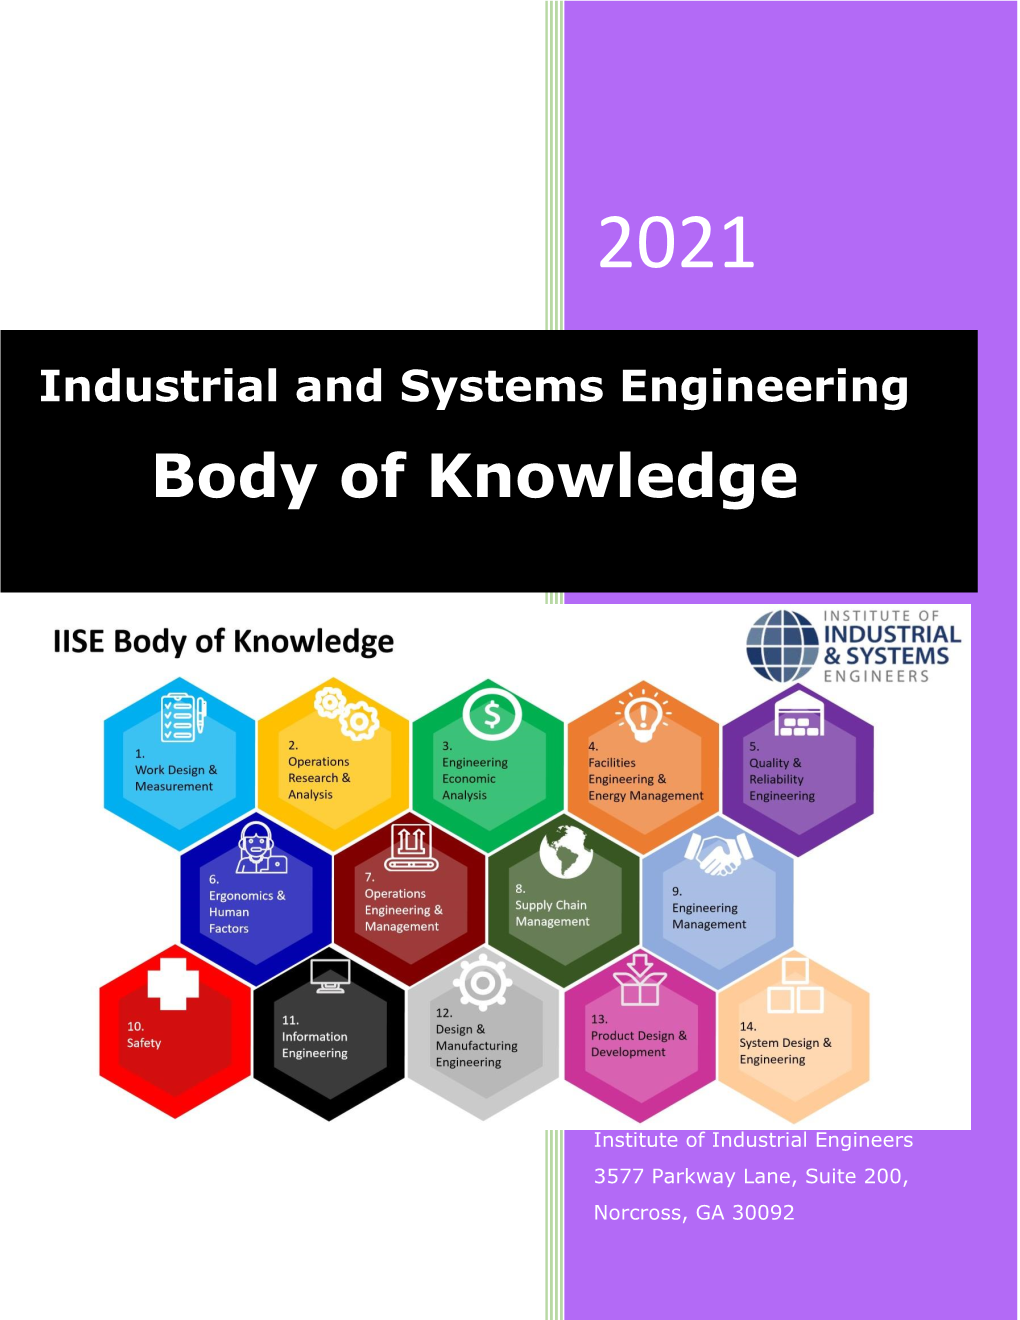 Industrial and Systems Engineering Body of Knowledge